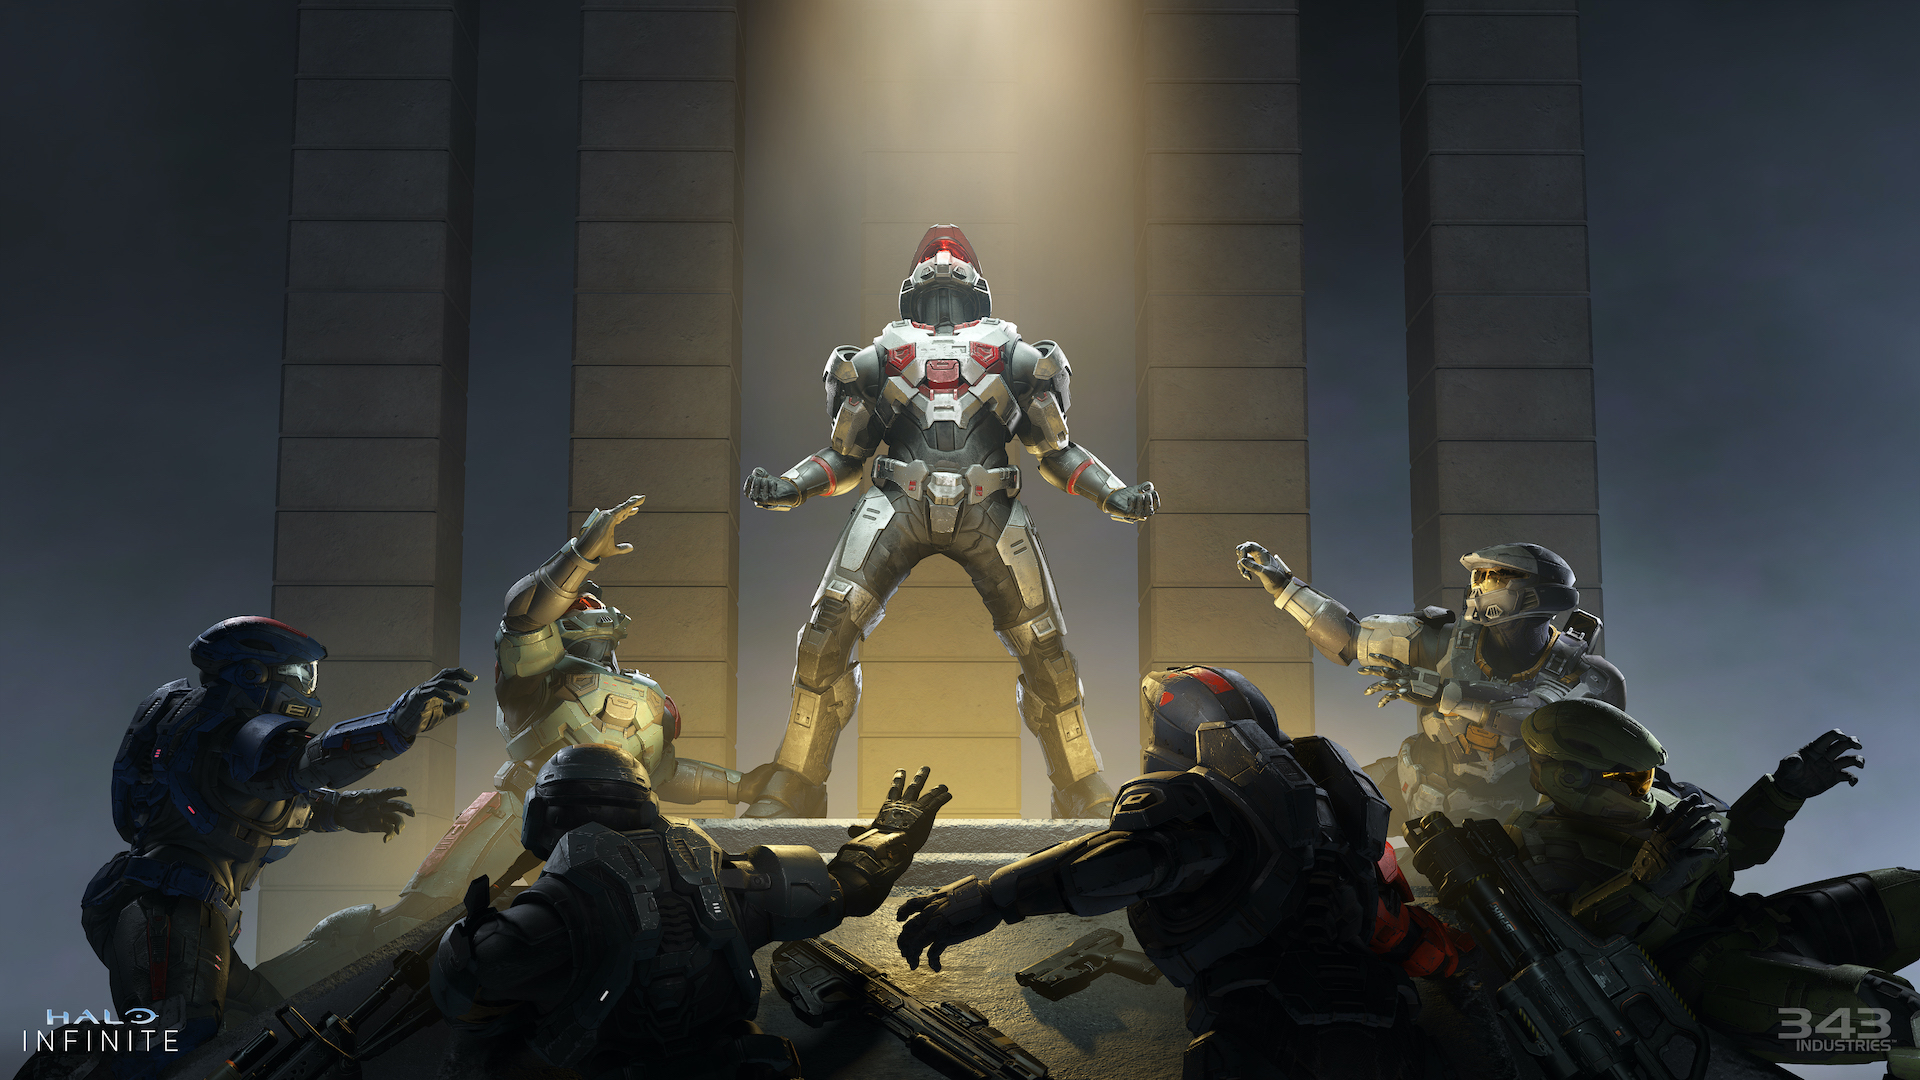 A Spartan stands, looking up into glowing light while others reach out to them